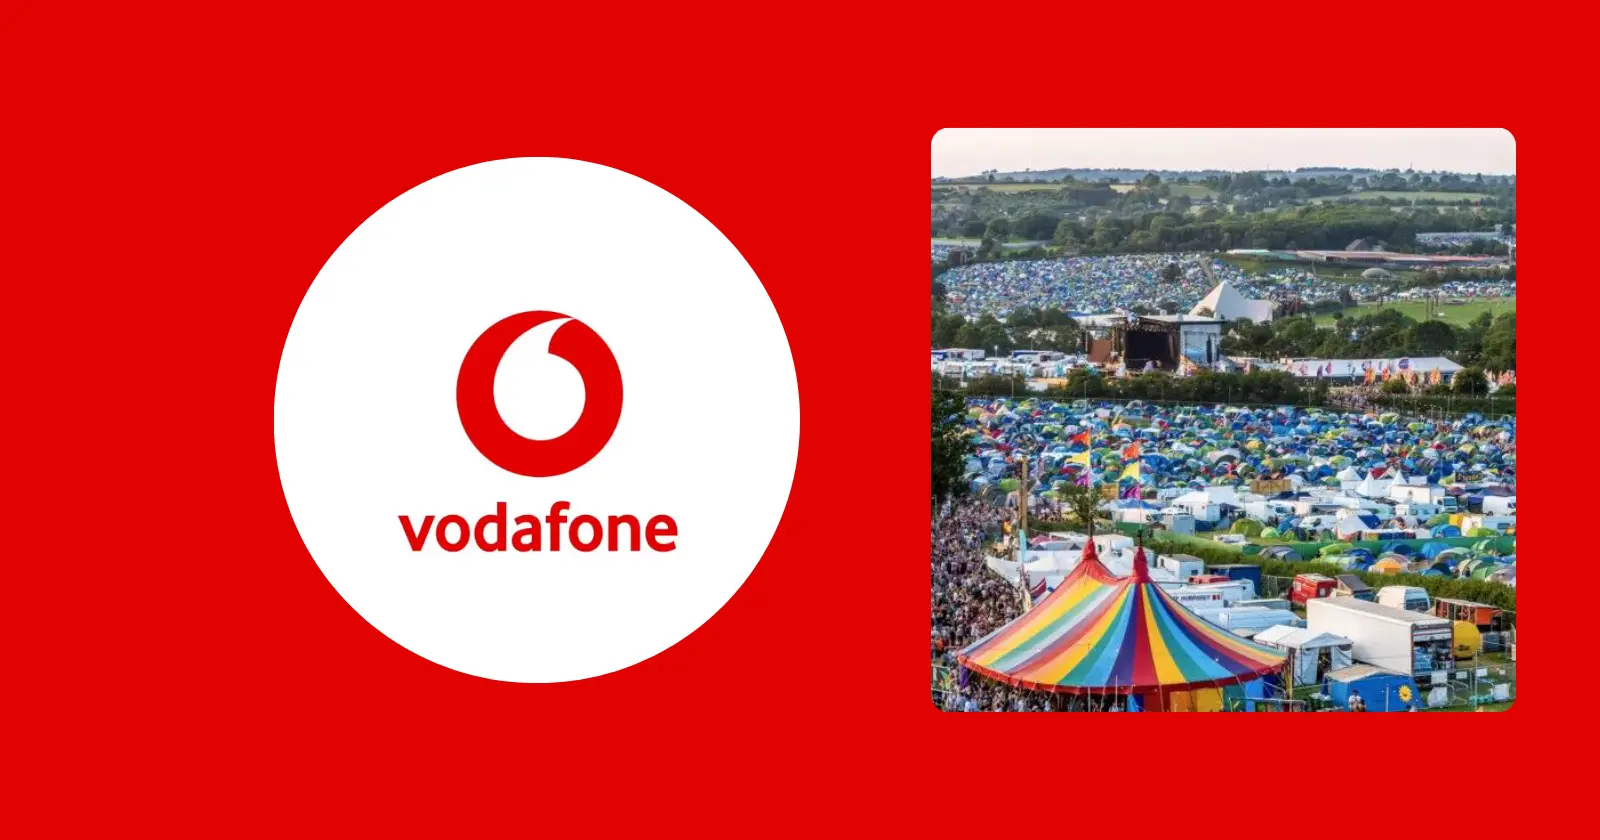 Vodafone offers an exclusive chance to win free Glastonbury Festival tickets